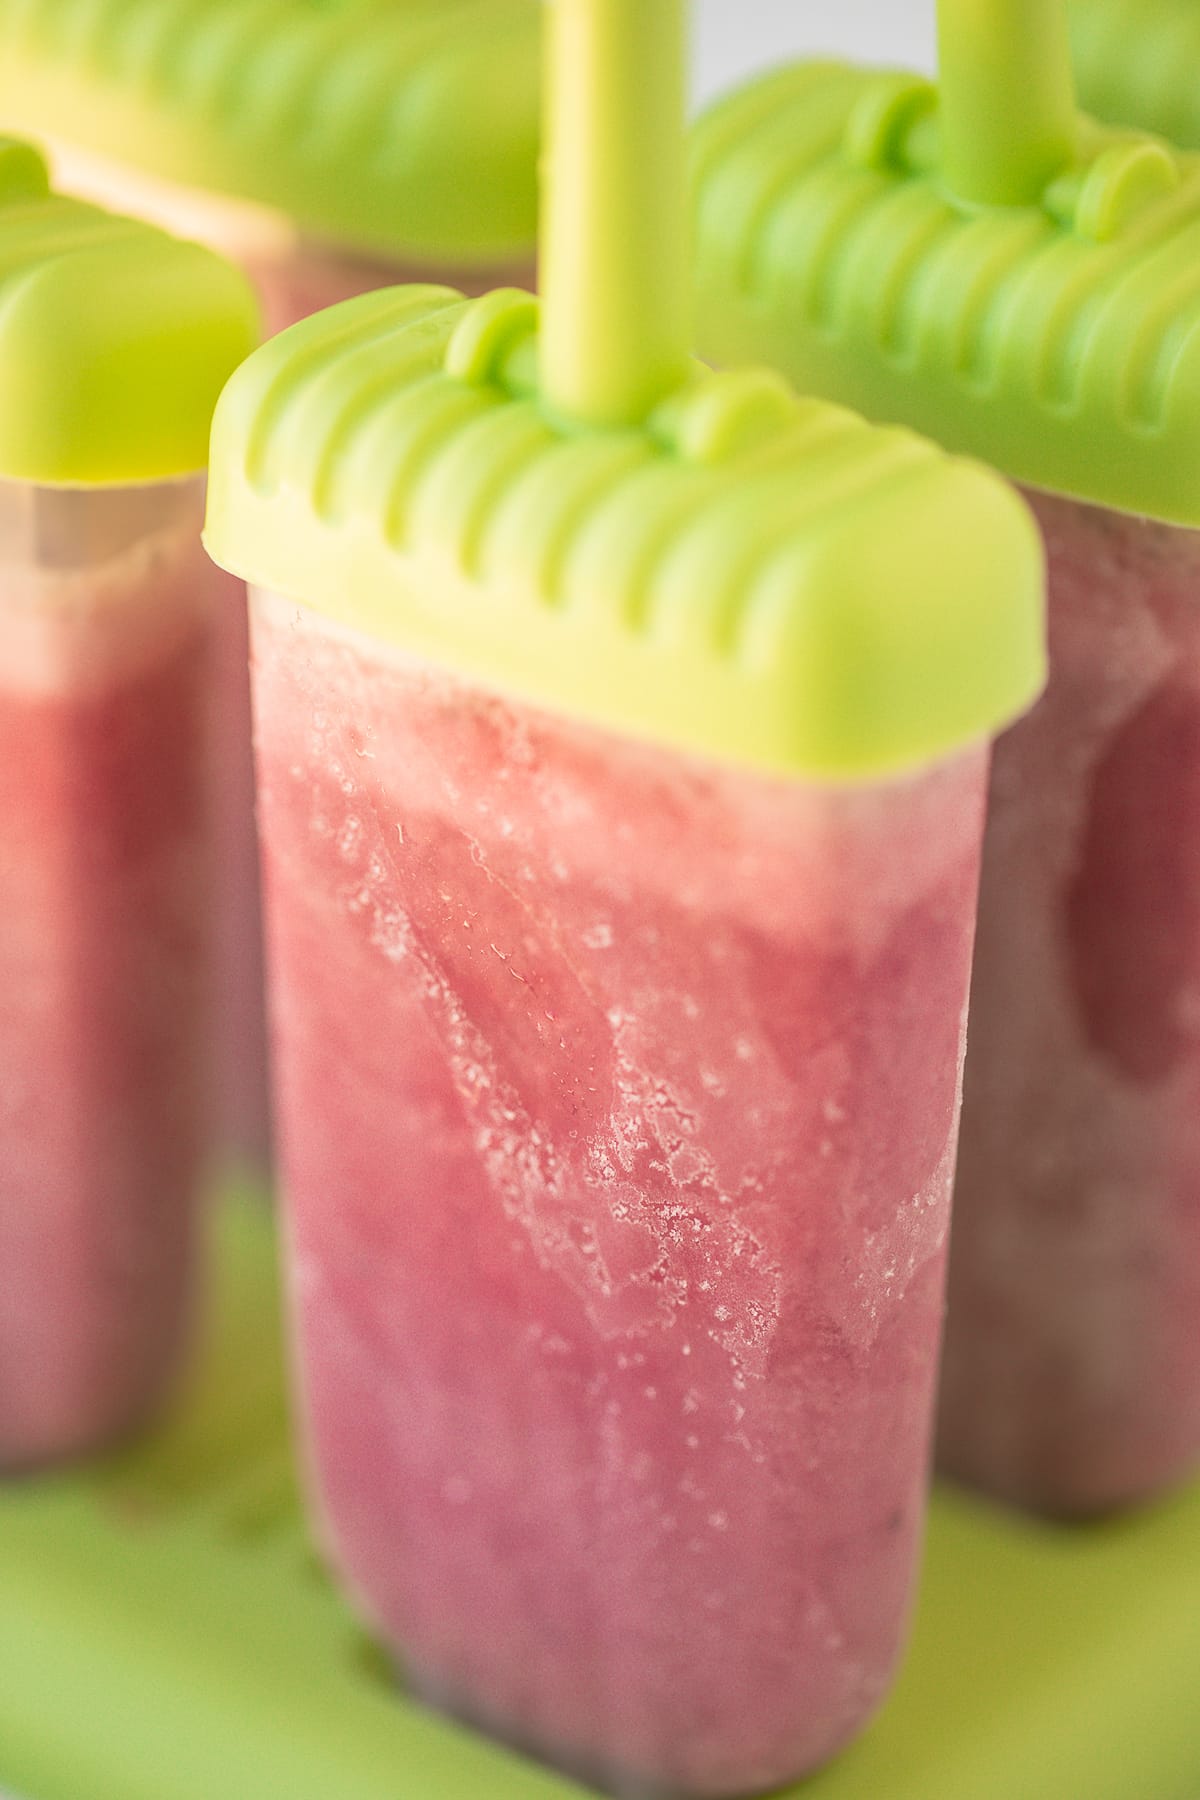 cherry popsicles frozen into molds